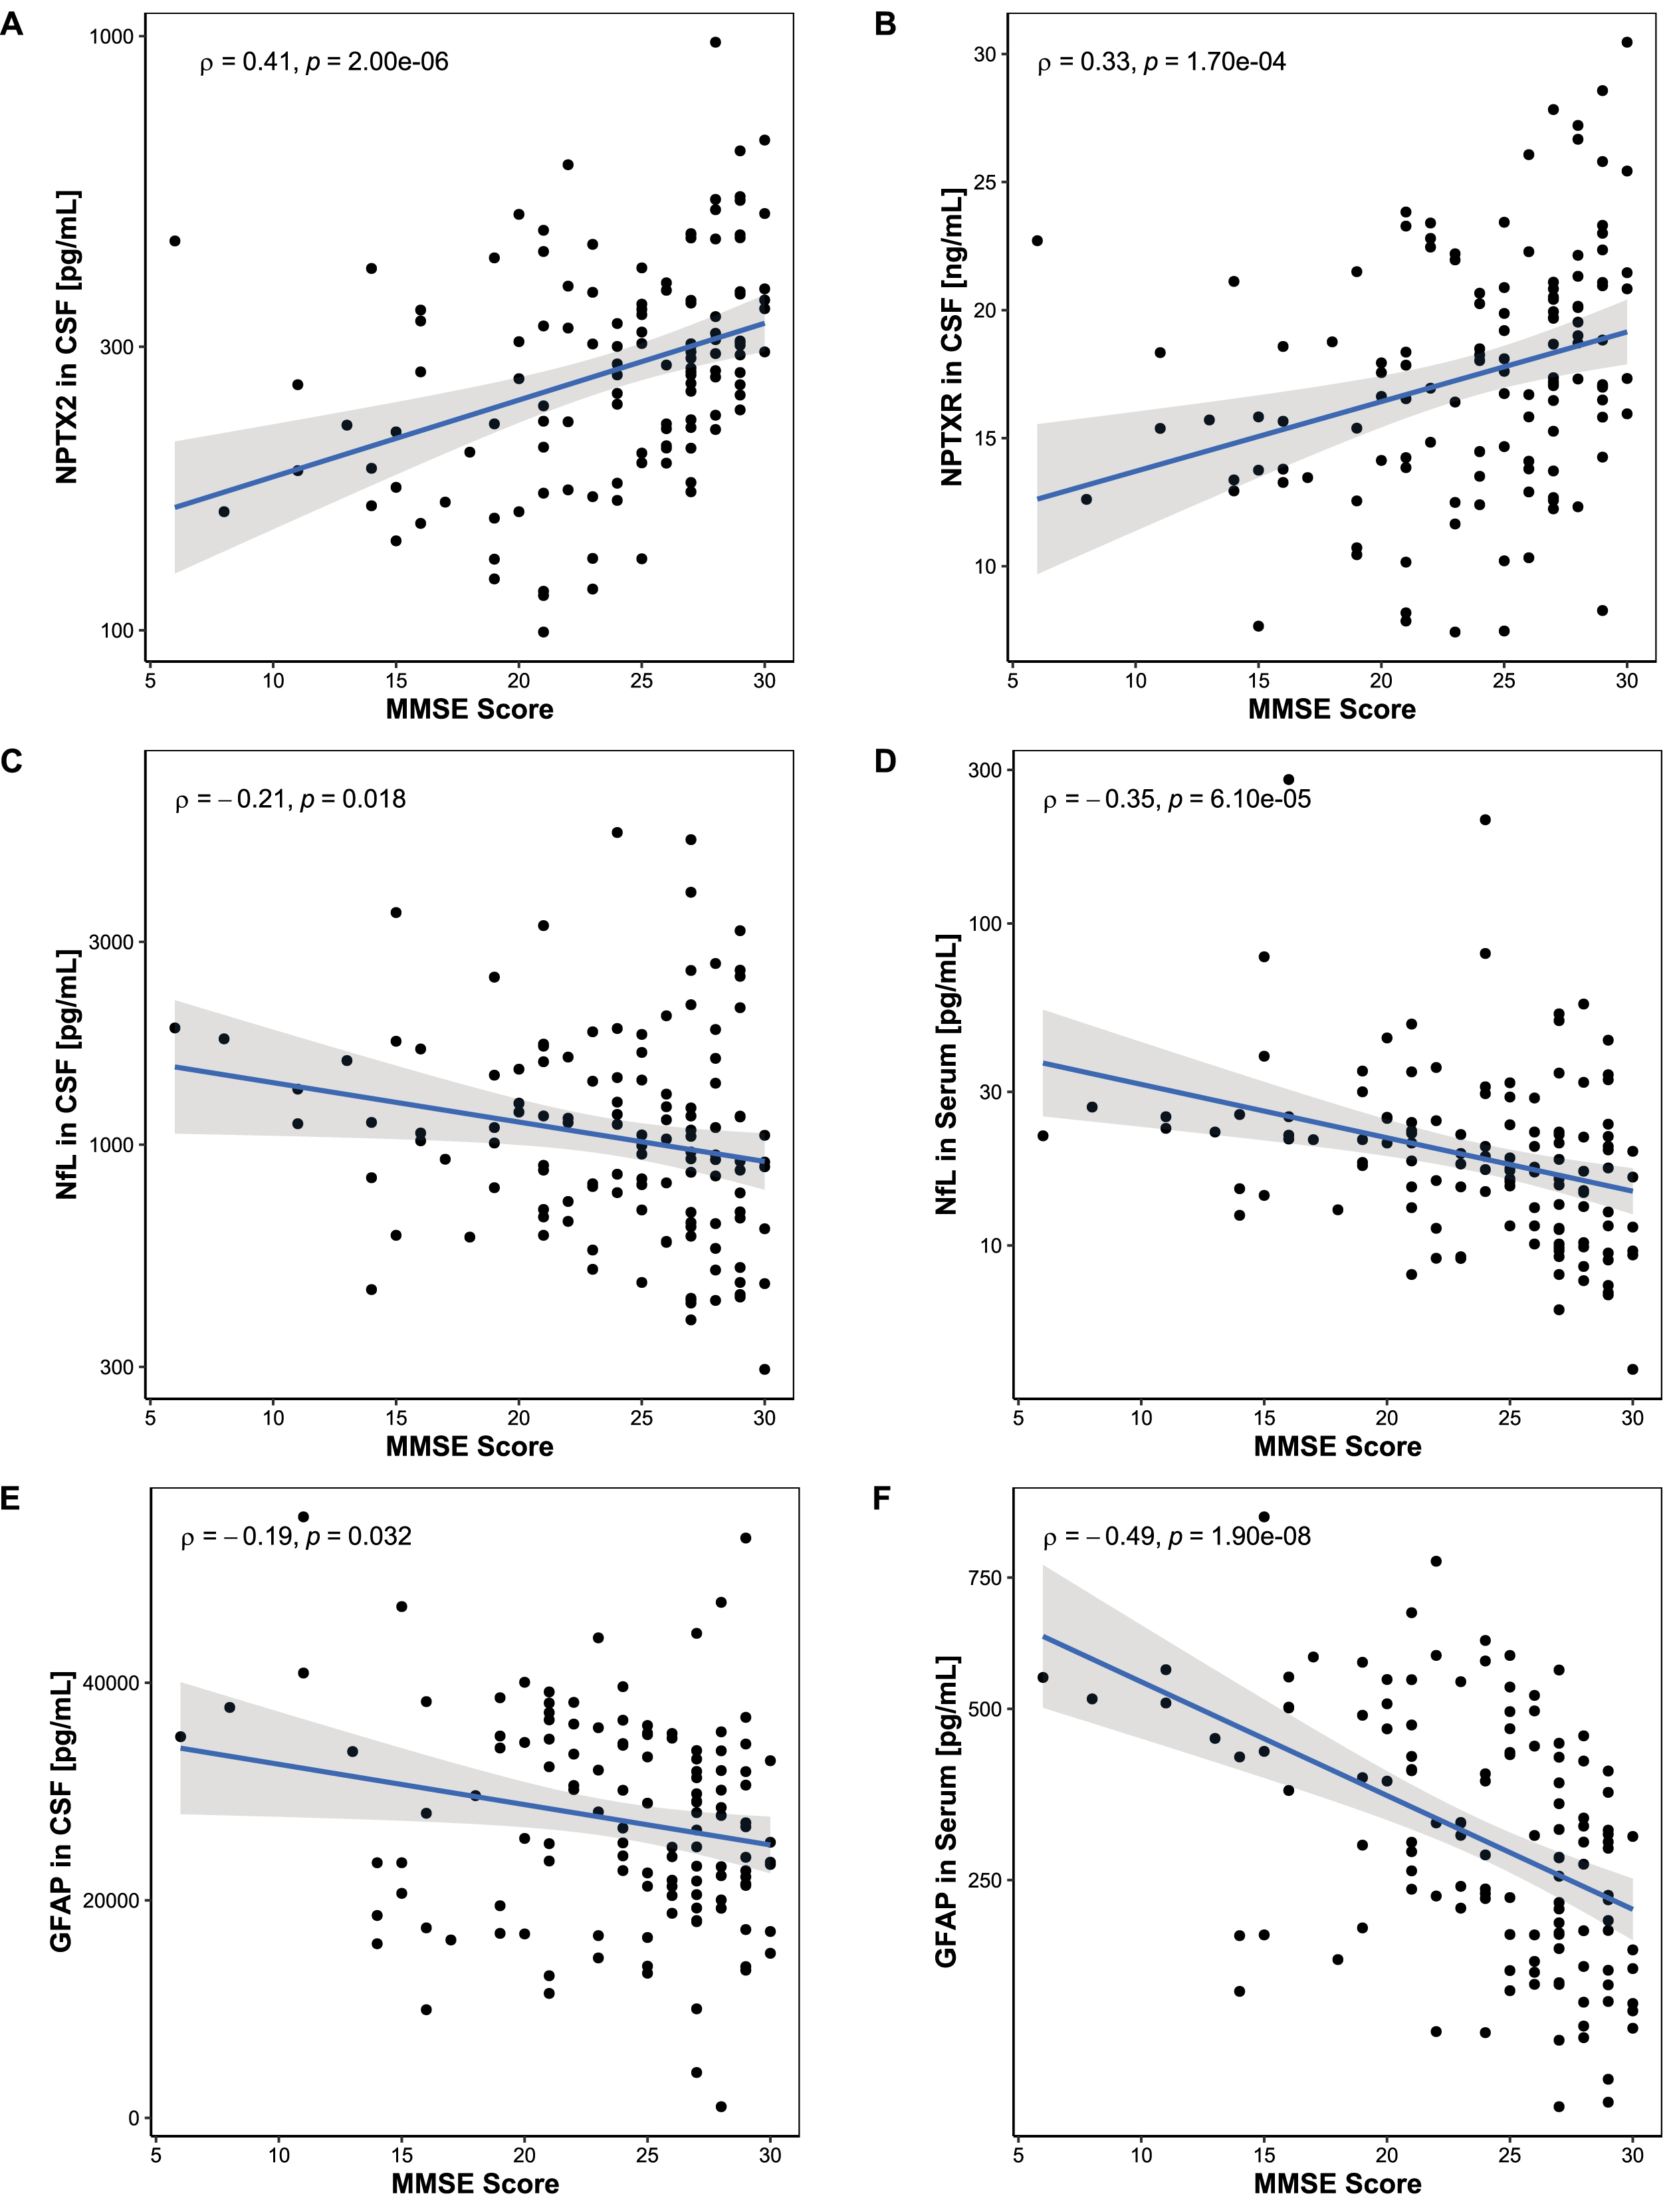 Association between MMSE score and biomarker levels. Associations between MMSE scores and biomarker levels were assessed using Spearman’s correlation. A, B) MMSE scores correlated positively with NPTX2 in CSF and NPTXR in CSF. C-F) MMSE scores correlated negatively with NfL and GFAP in serum but did not reach significance in CSF. Lines represent linear regression and grey areas represent 95% confidence intervals. MMSE, Mini-mental state examination; CSF, Cerebrospinal fluid; NPTX2, Neuronal pentraxin-2; NPTXR, Neuronal pentraxin receptor; NfL, Neurofilament light; GFAP, Glial fibrillary acidic protein.